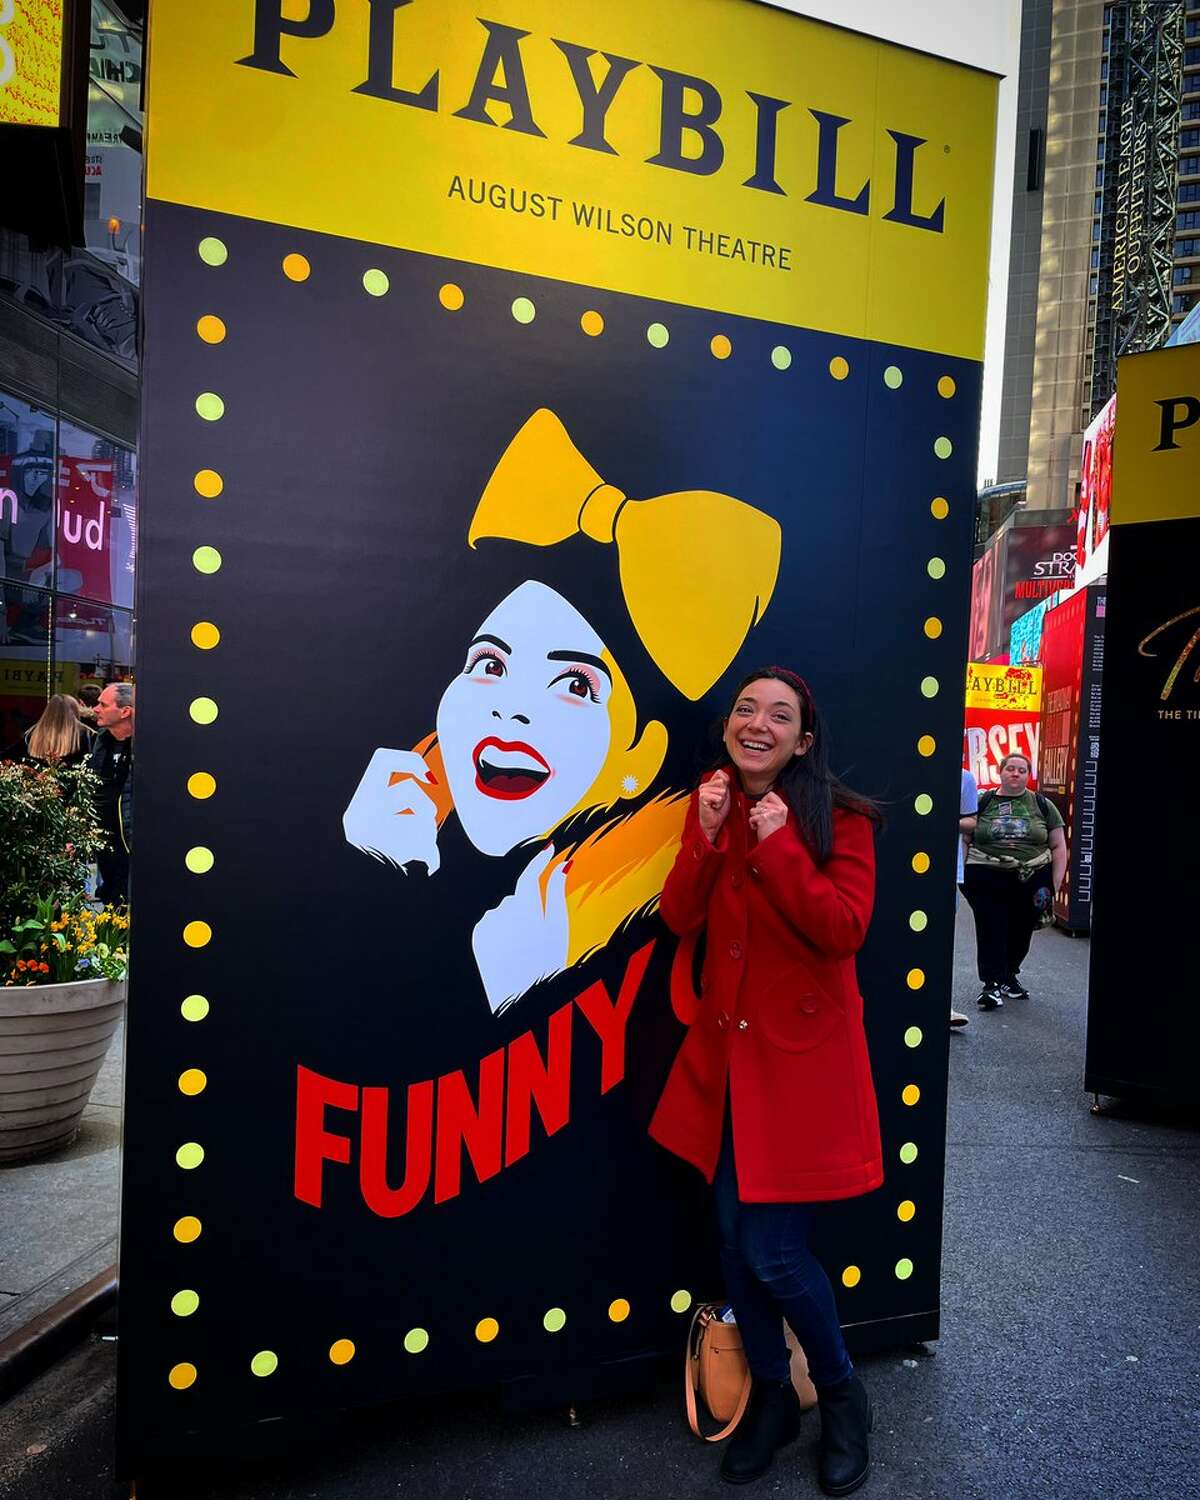 Julie Benko debuted as Fanny Brice on Broadway's Funny Girl on April 29. Benko is Beanie Feldstein's stanby on the production. 